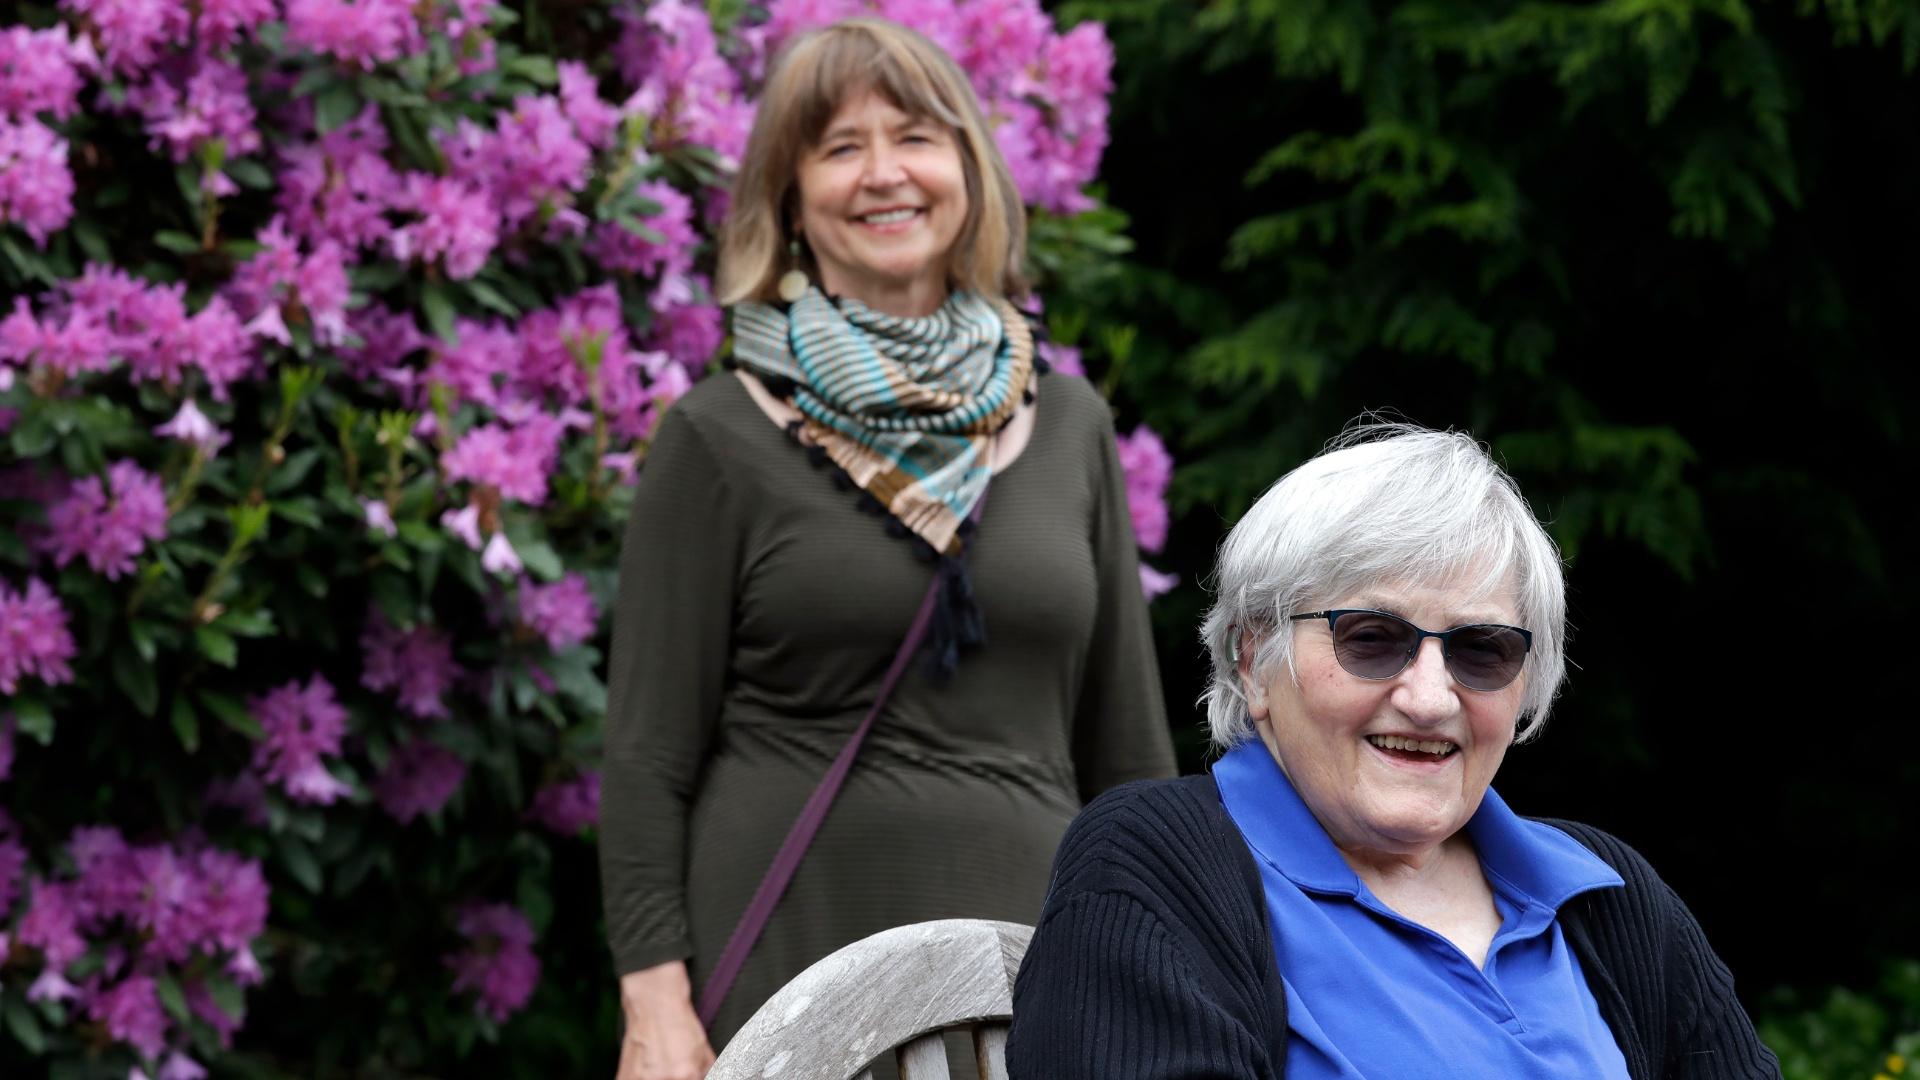 Jessie Cornwell, a resident of the Ida Culver House Ravenna, right, poses for a photo with the Rev. Jane Pauw, in Seattle on May 21, 2020. Cornwell tested positive for the coronavirus but never became ill, and may have been infectious when she shared a ride to Bible study with Pauw, who later got sick with COVID-19. (AP Photo / Elaine Thompson)